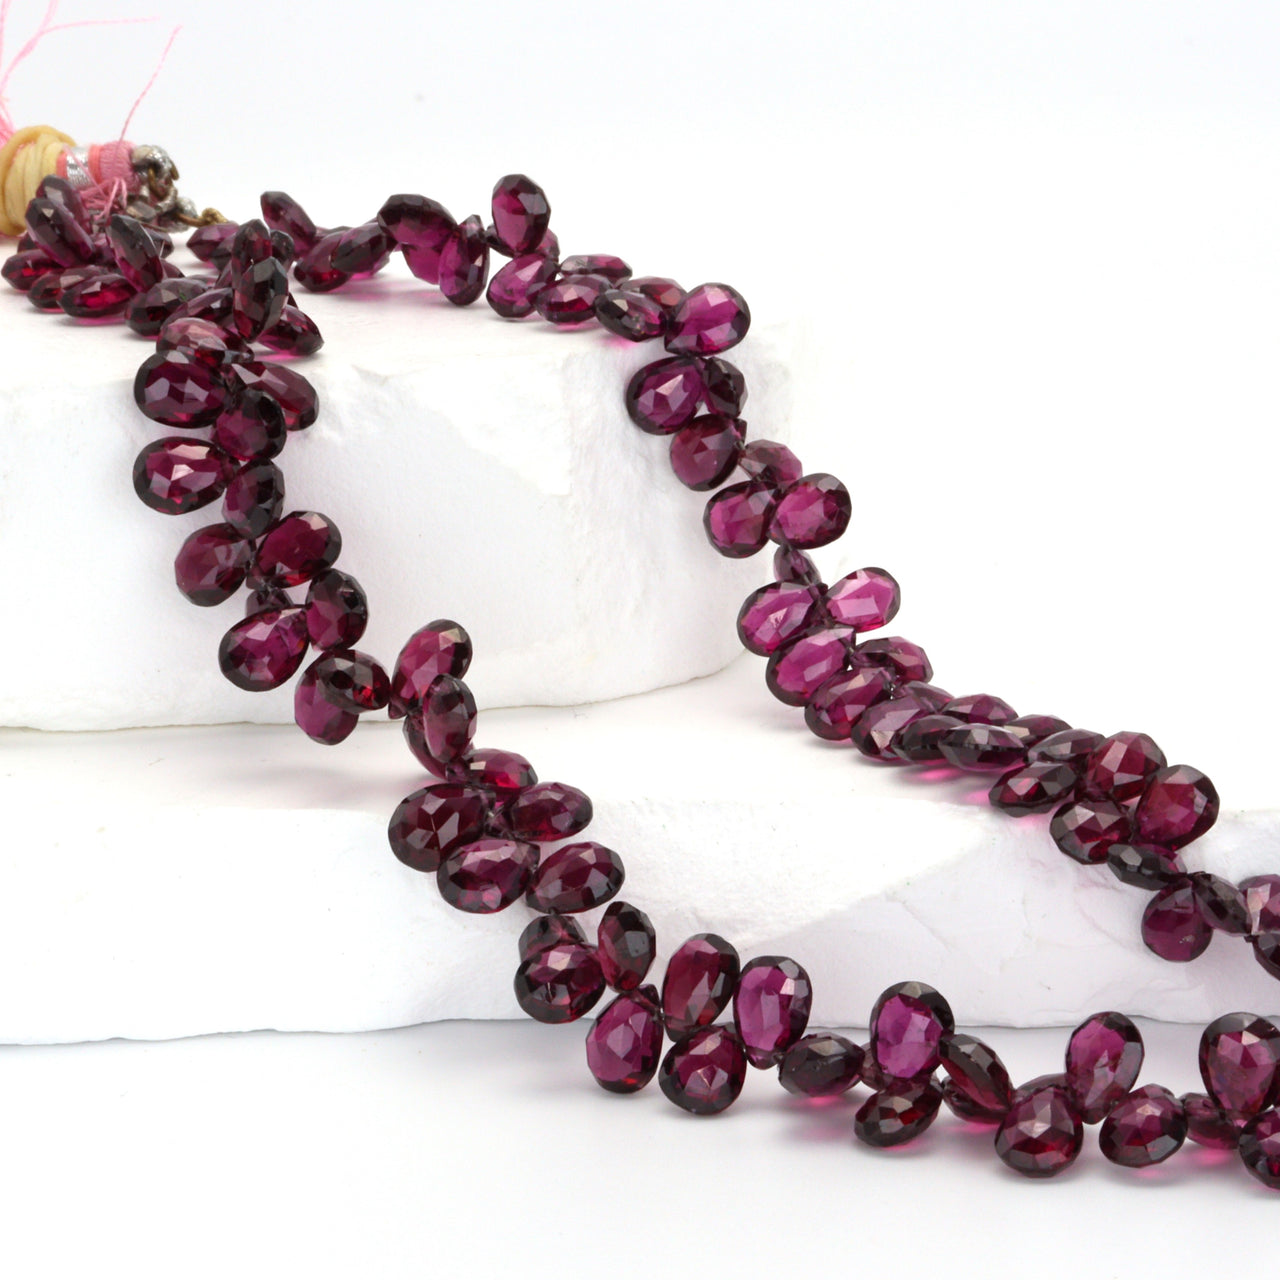 AAA Rhodolite Garnet 8x6mm Faceted Pear Shaped Briolettes